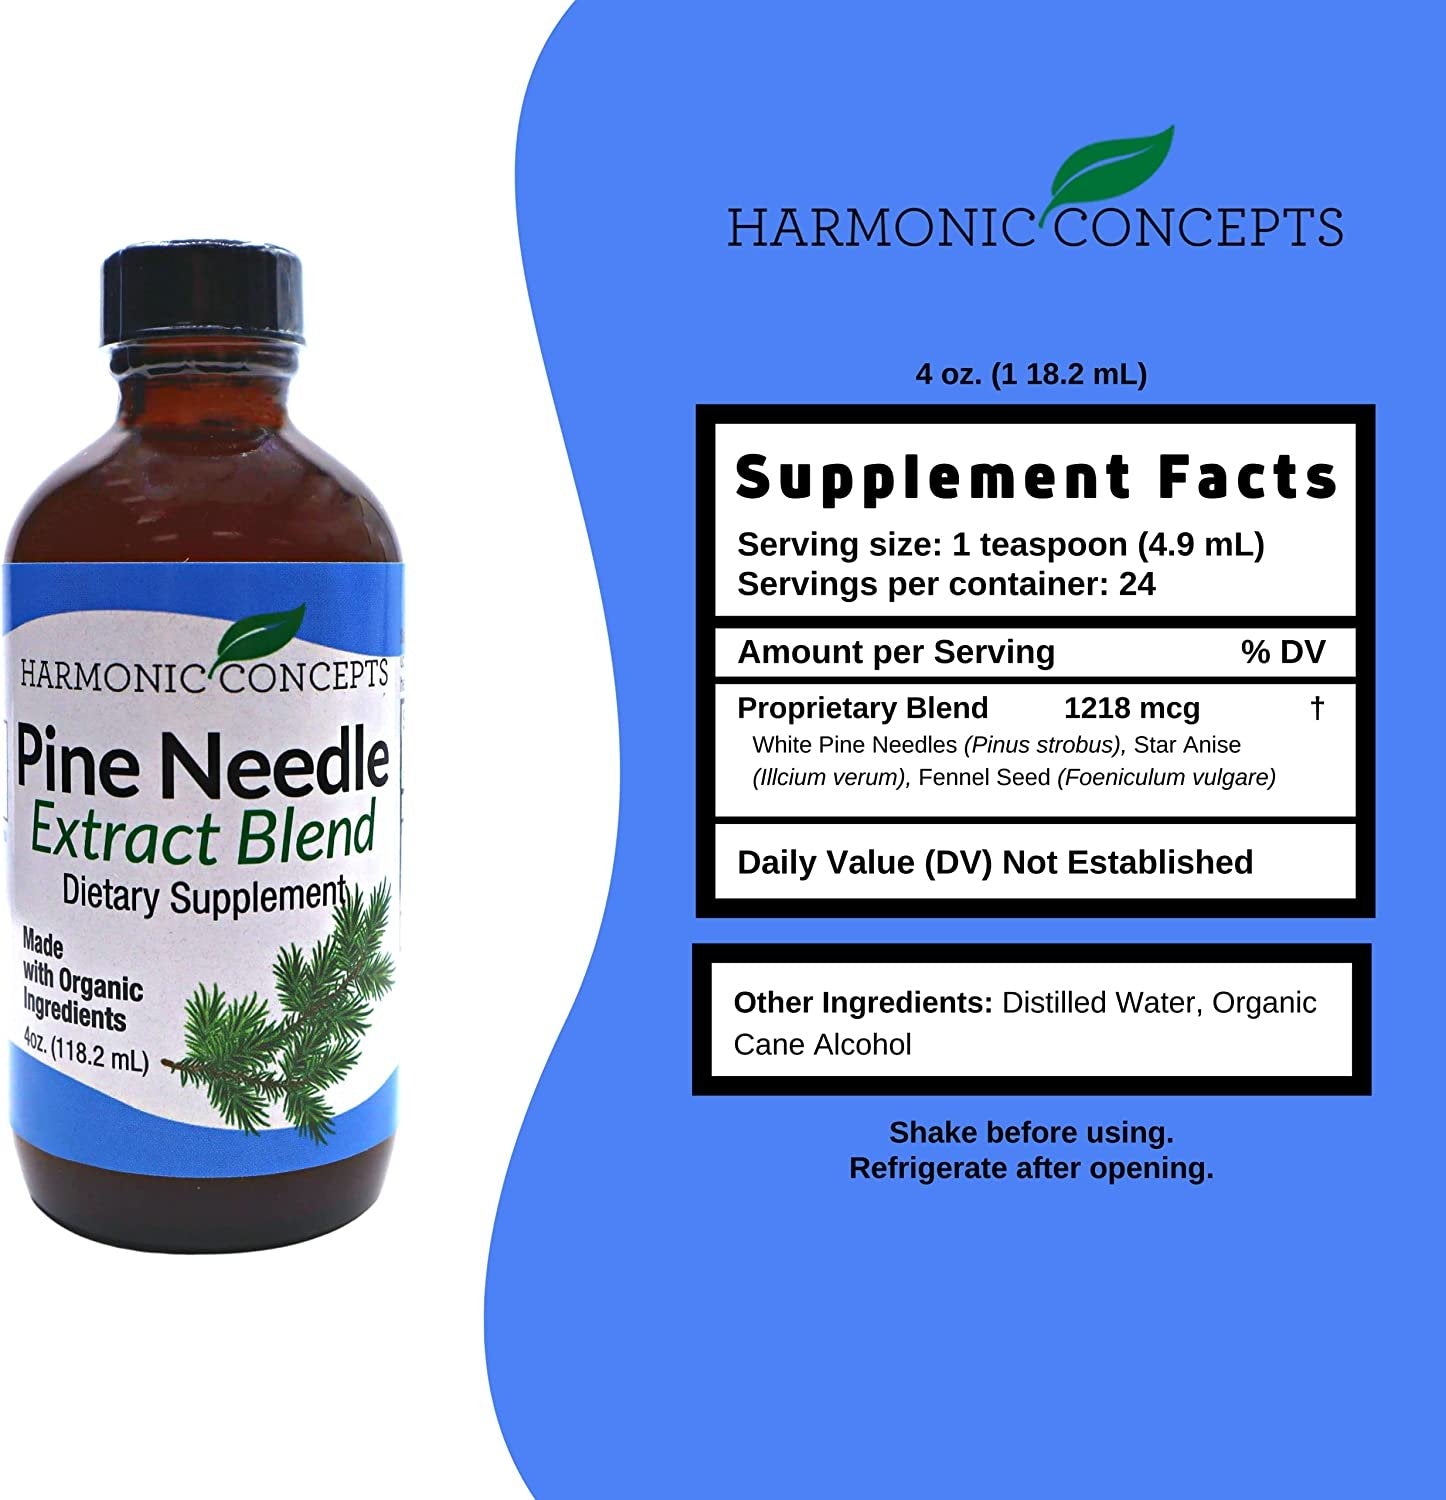 Harmonic Concepts Pine Needle Extract Blend - Organic Liquid Dietary Supplement - Vitamin A and Vitamin C - Immune Support Supplement - 4 Oz with Worldwide Nutrition Multi Purpose Key Chain